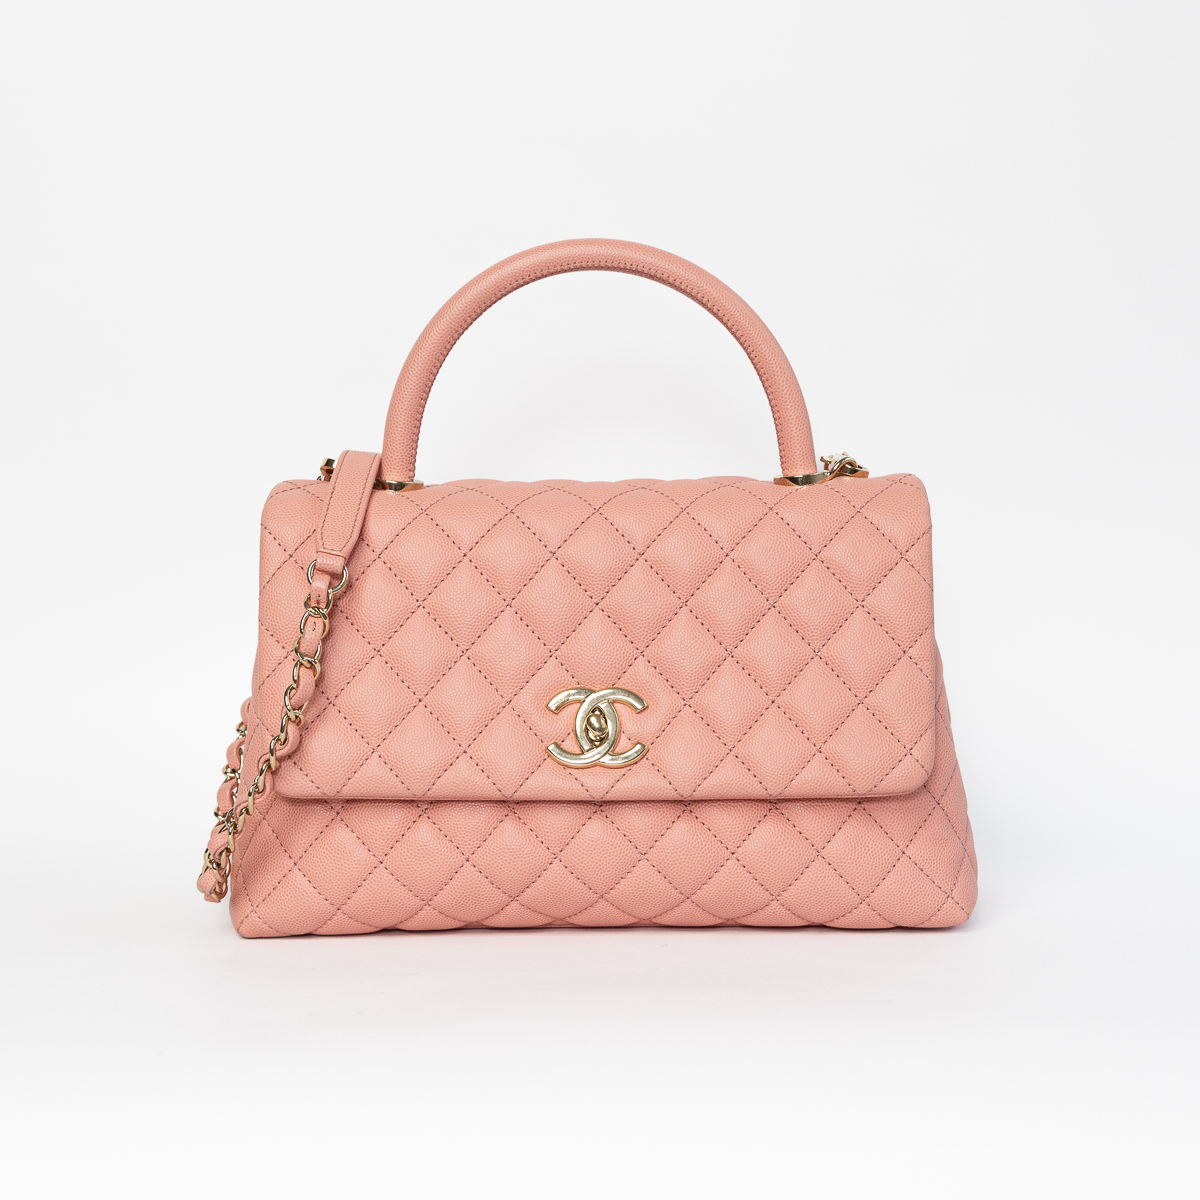 Chanel Coco Top Handle Medium Bag Pink Caviar with gold hardware